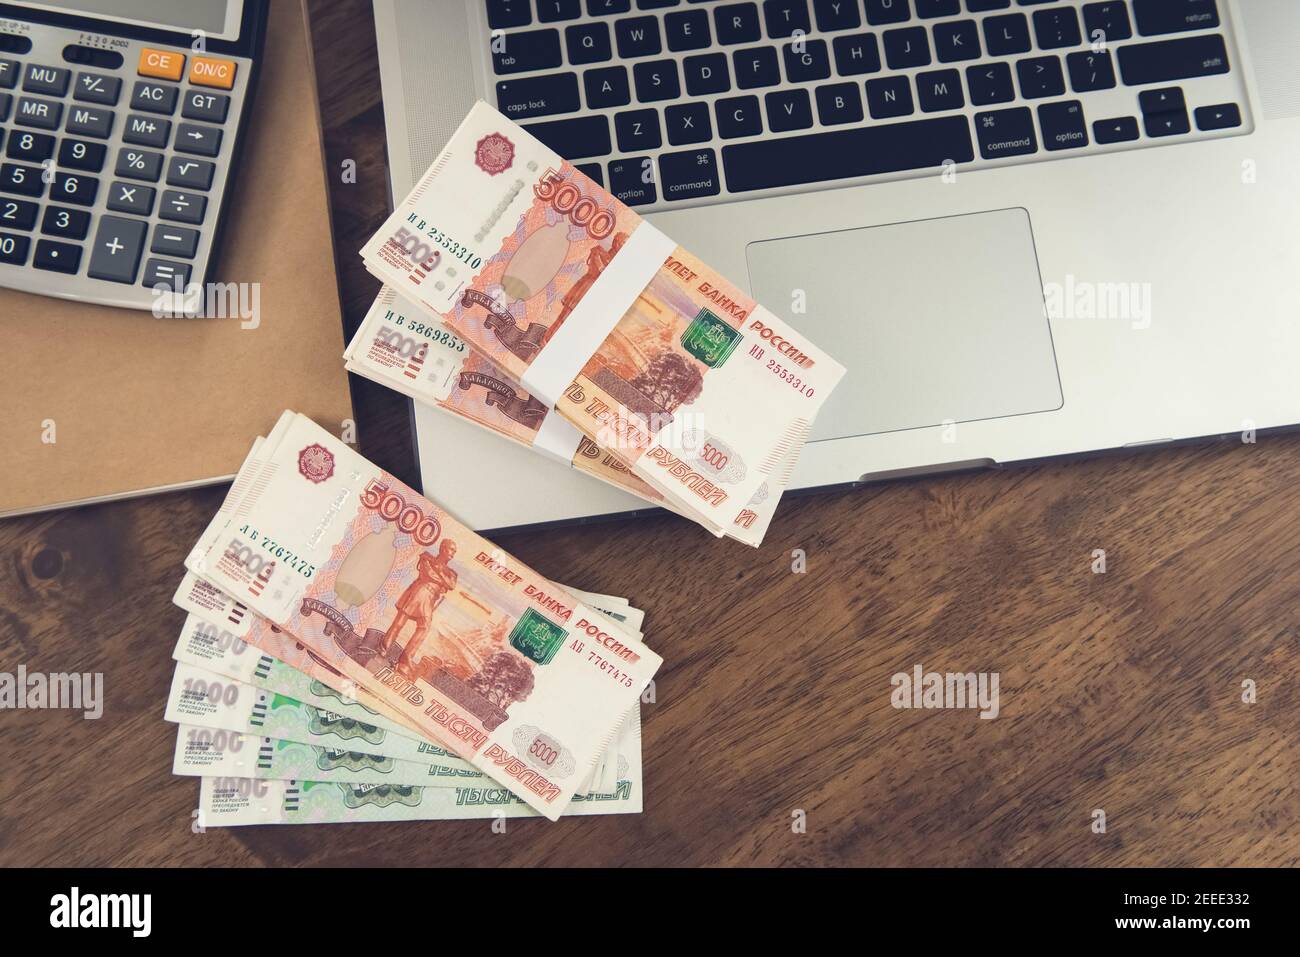 Money, Russian Ruble currency, on laptop computer at working table - investment and financial management concepts Stock Photo